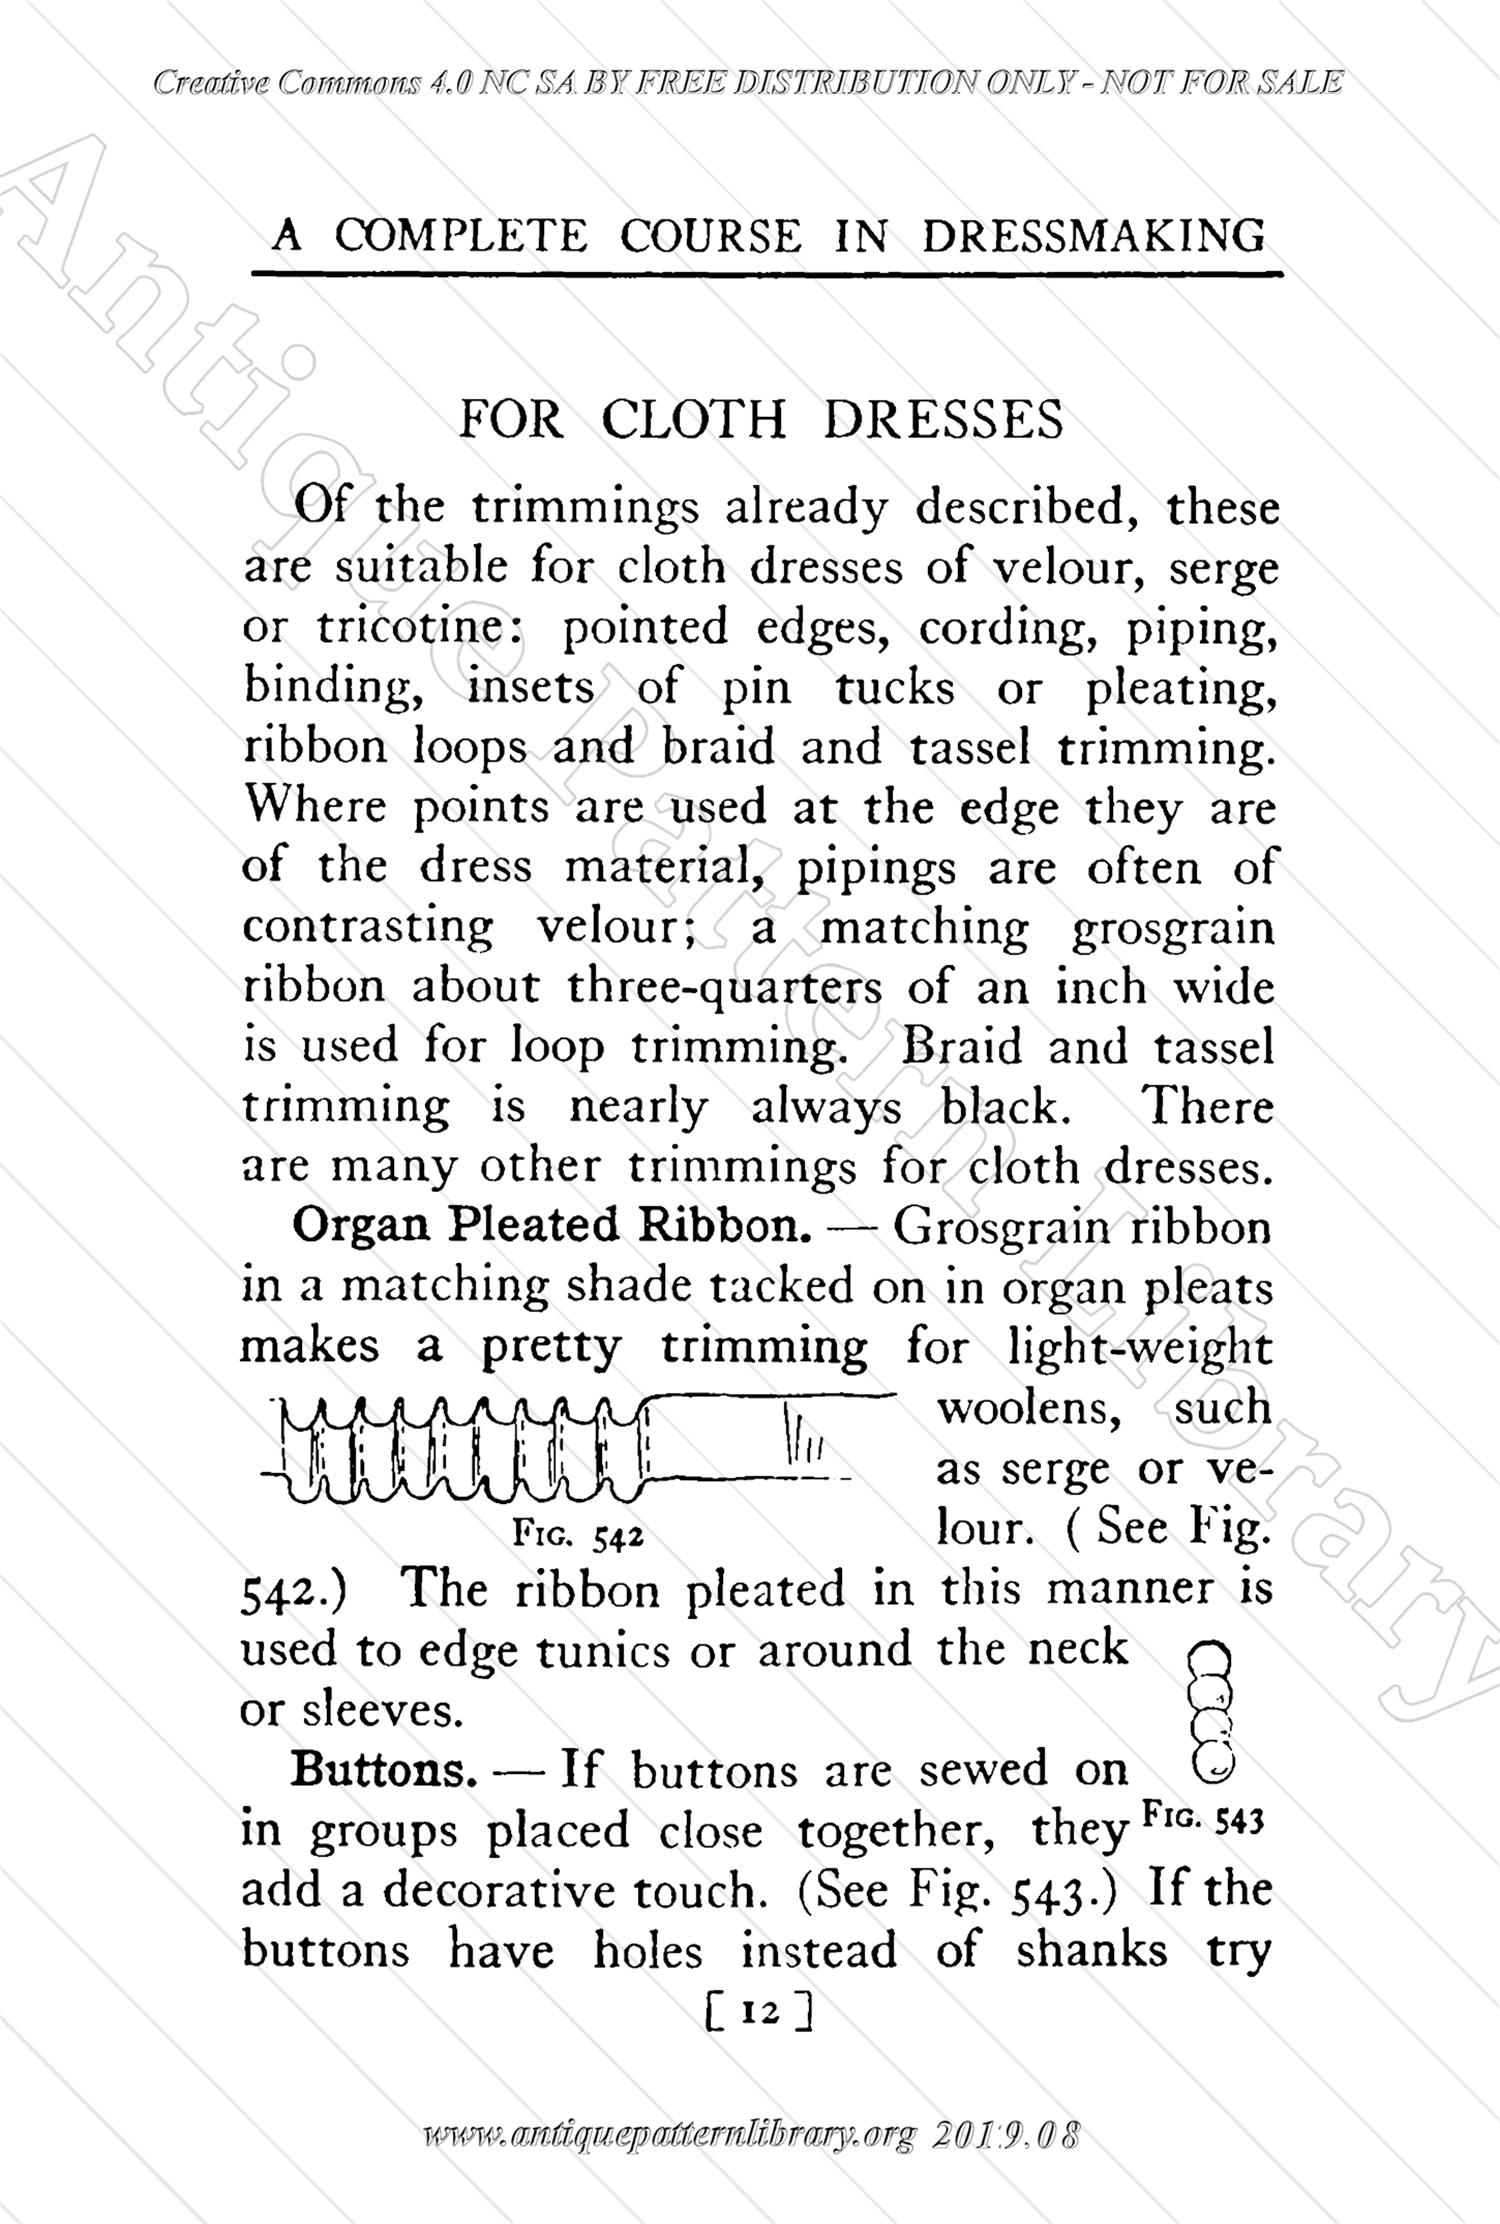 B-YS106 Complete Course in Dressmaking in Twelve Lessons: